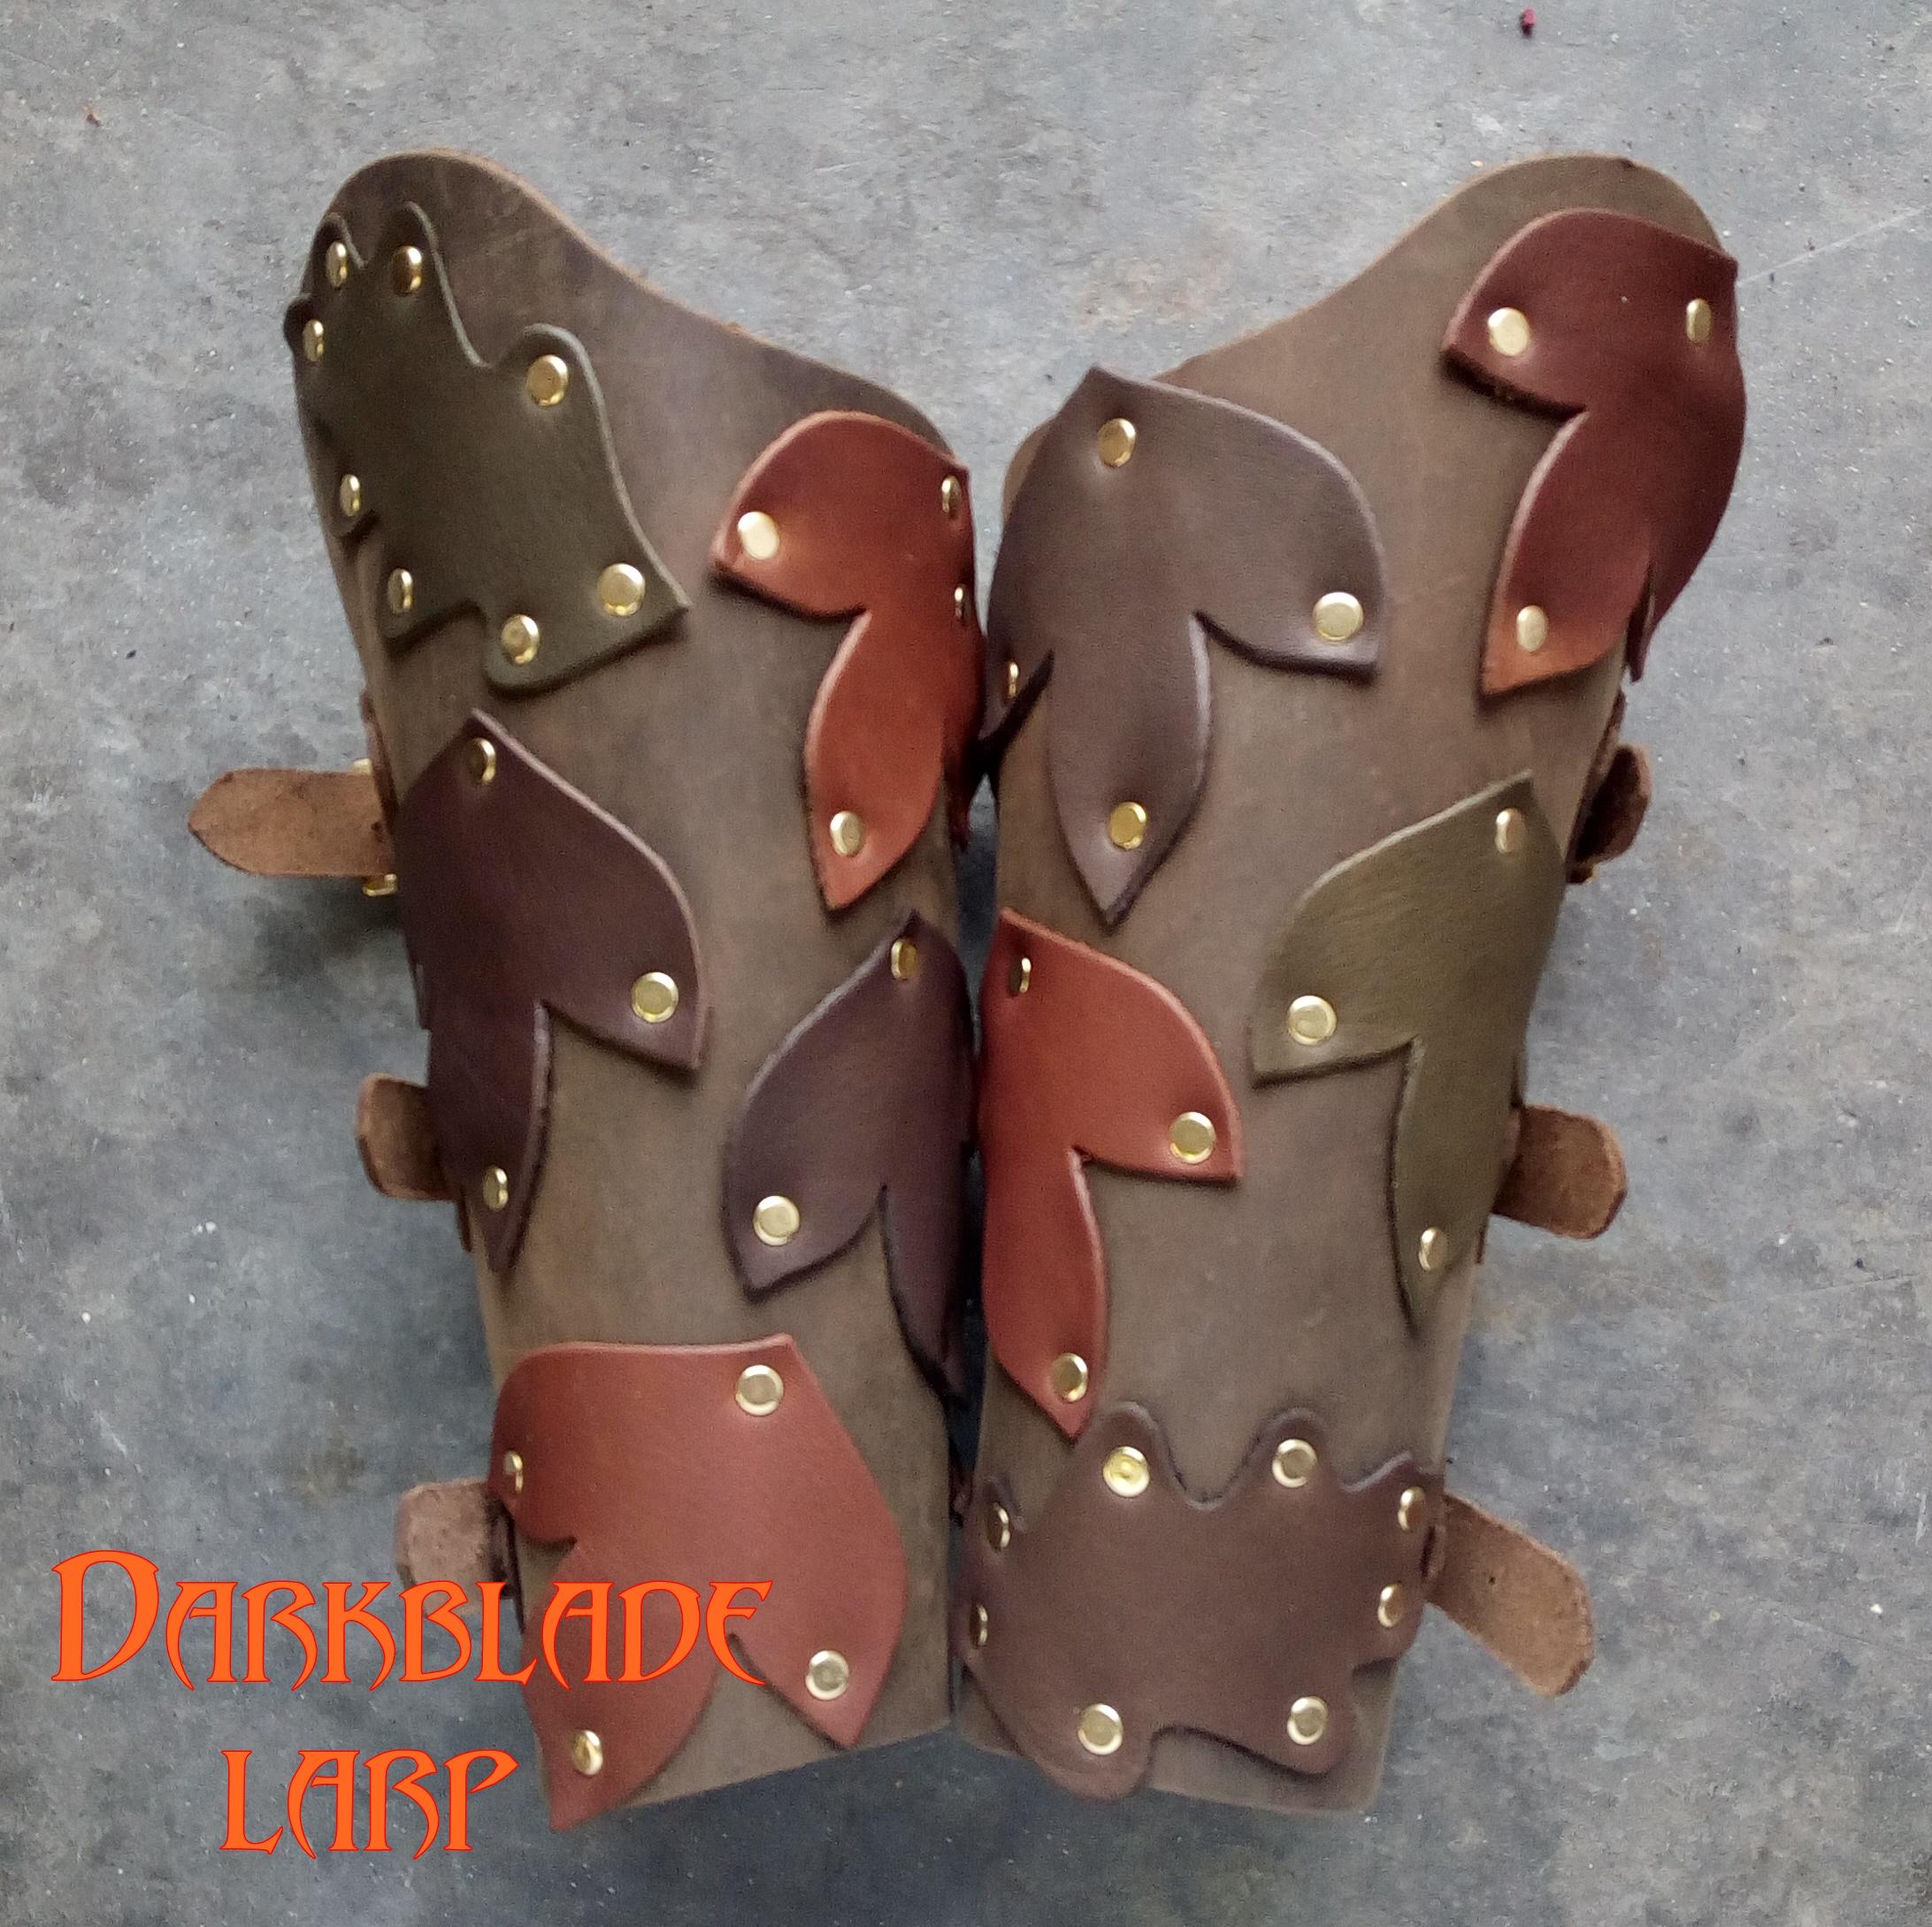 leather vambraces decorated with suede leaves